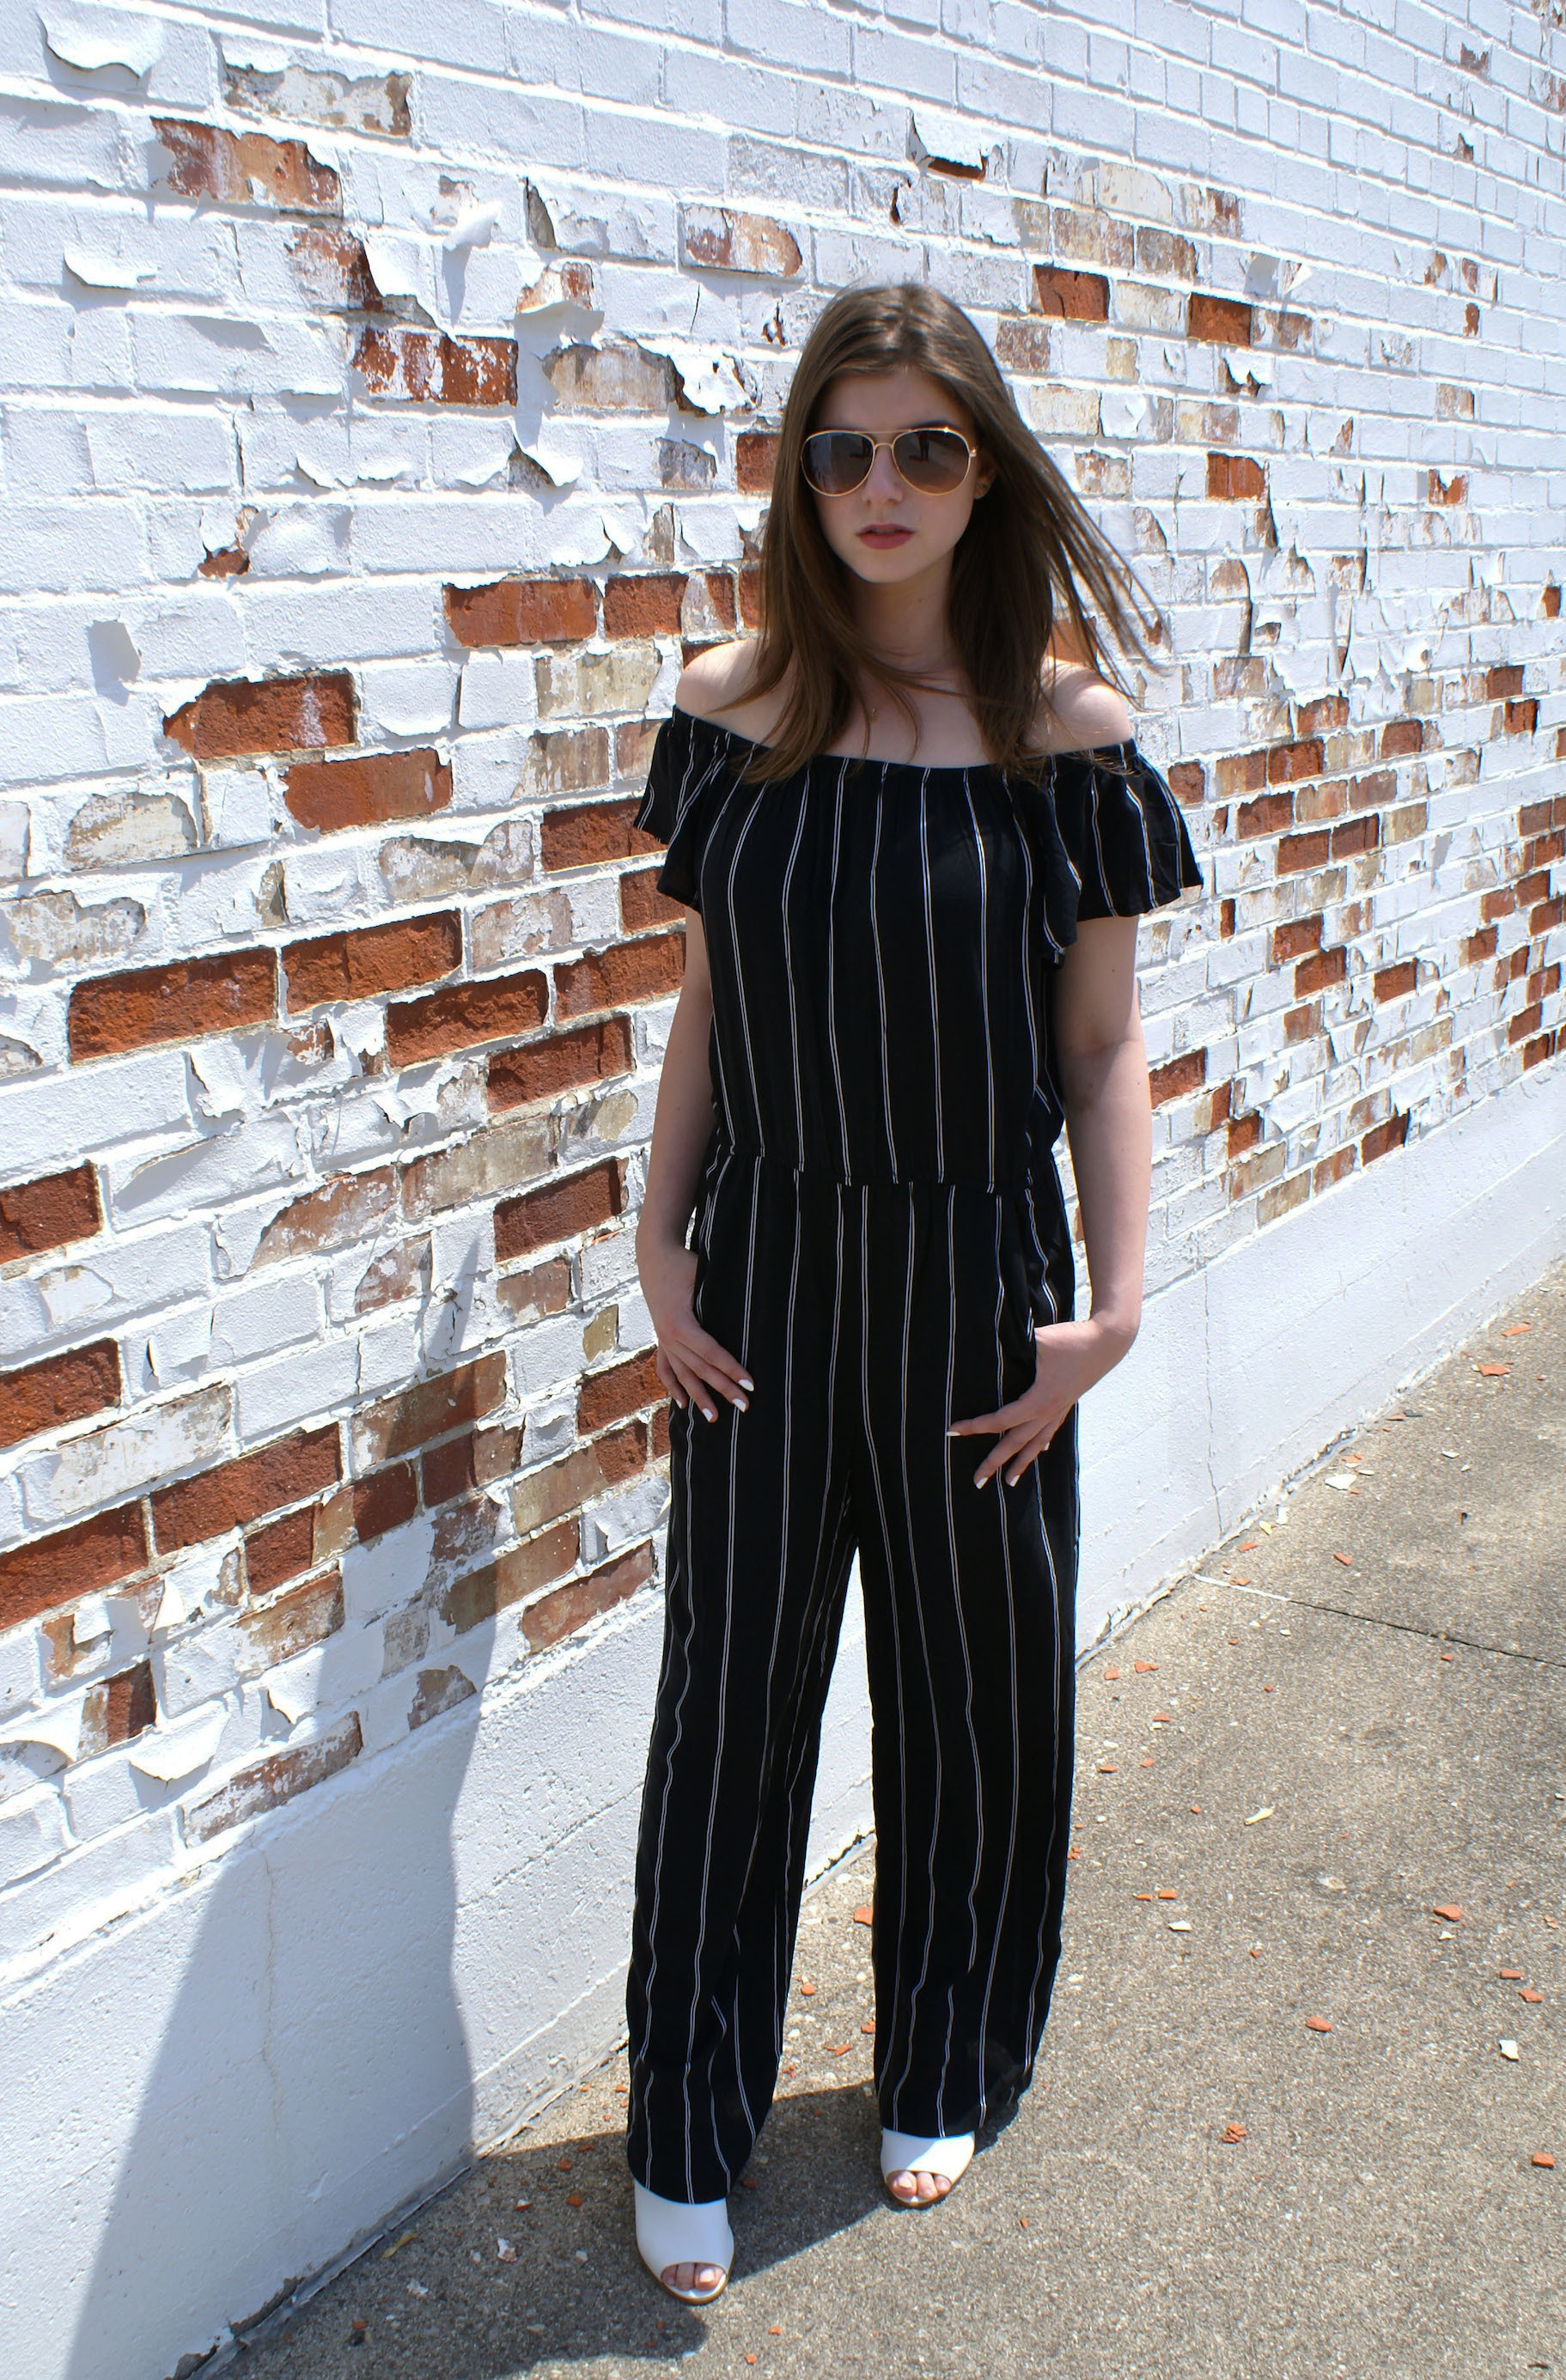 Women's Black and White Vertical Striped Jumpsuit, White Leather Heeled ...